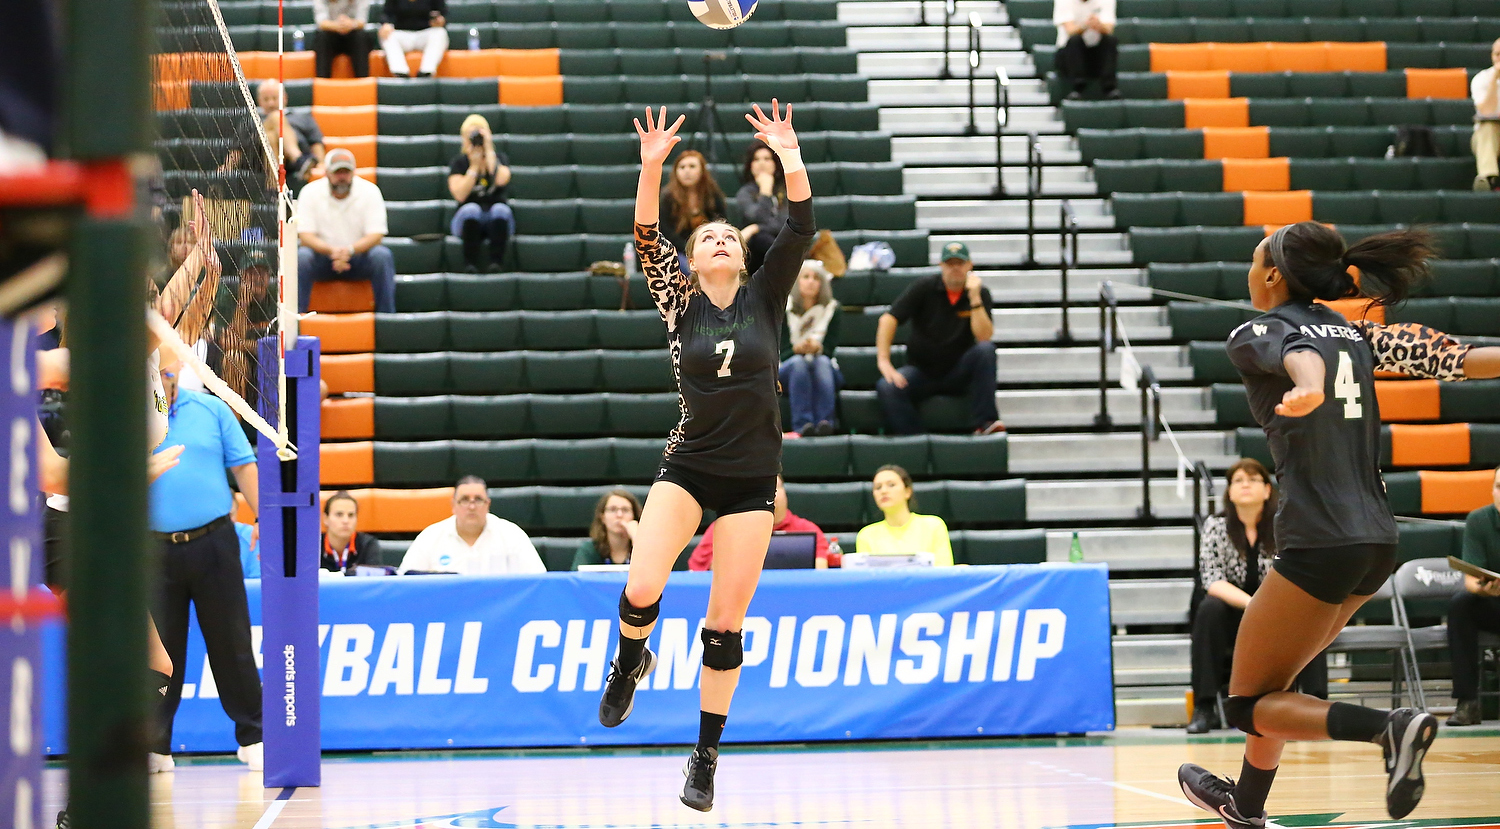 No. 19 Volleyball drops to No. 7 Southwestern in NCAA Championship